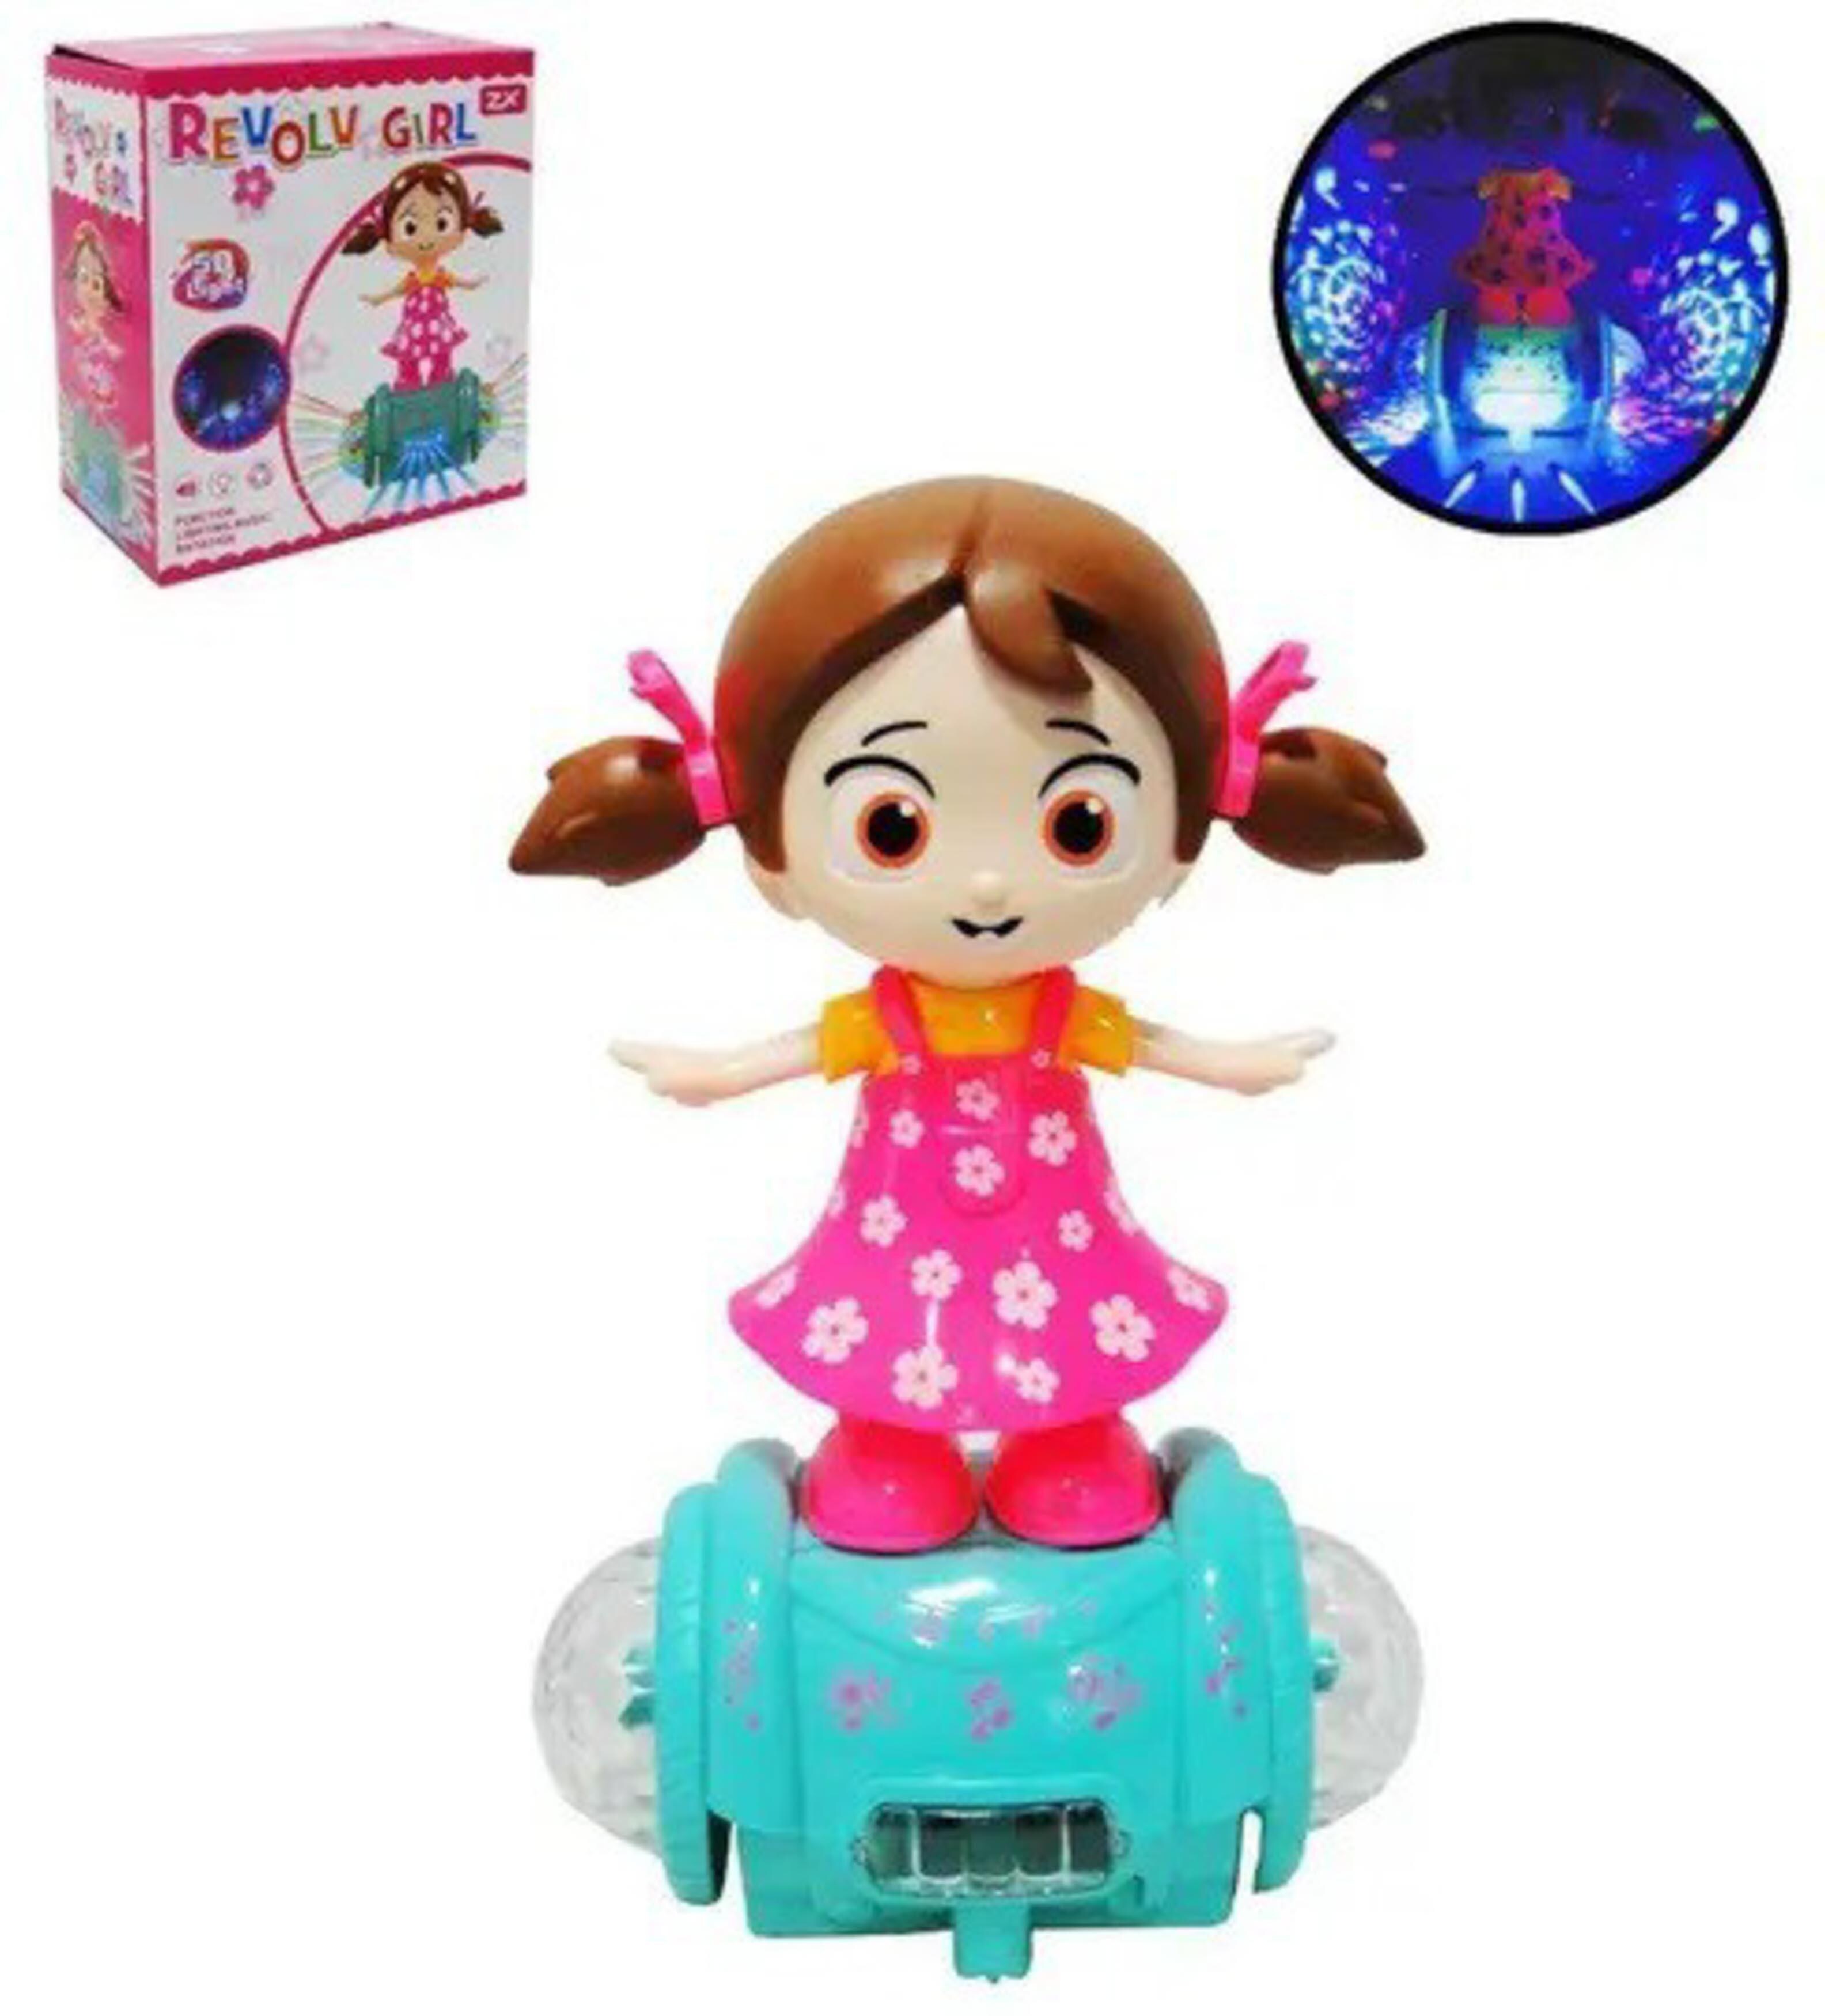 Toyvala Plastic Musical Revolve Girl Toy with Flashing 5D Lights 3 years -  JioMart